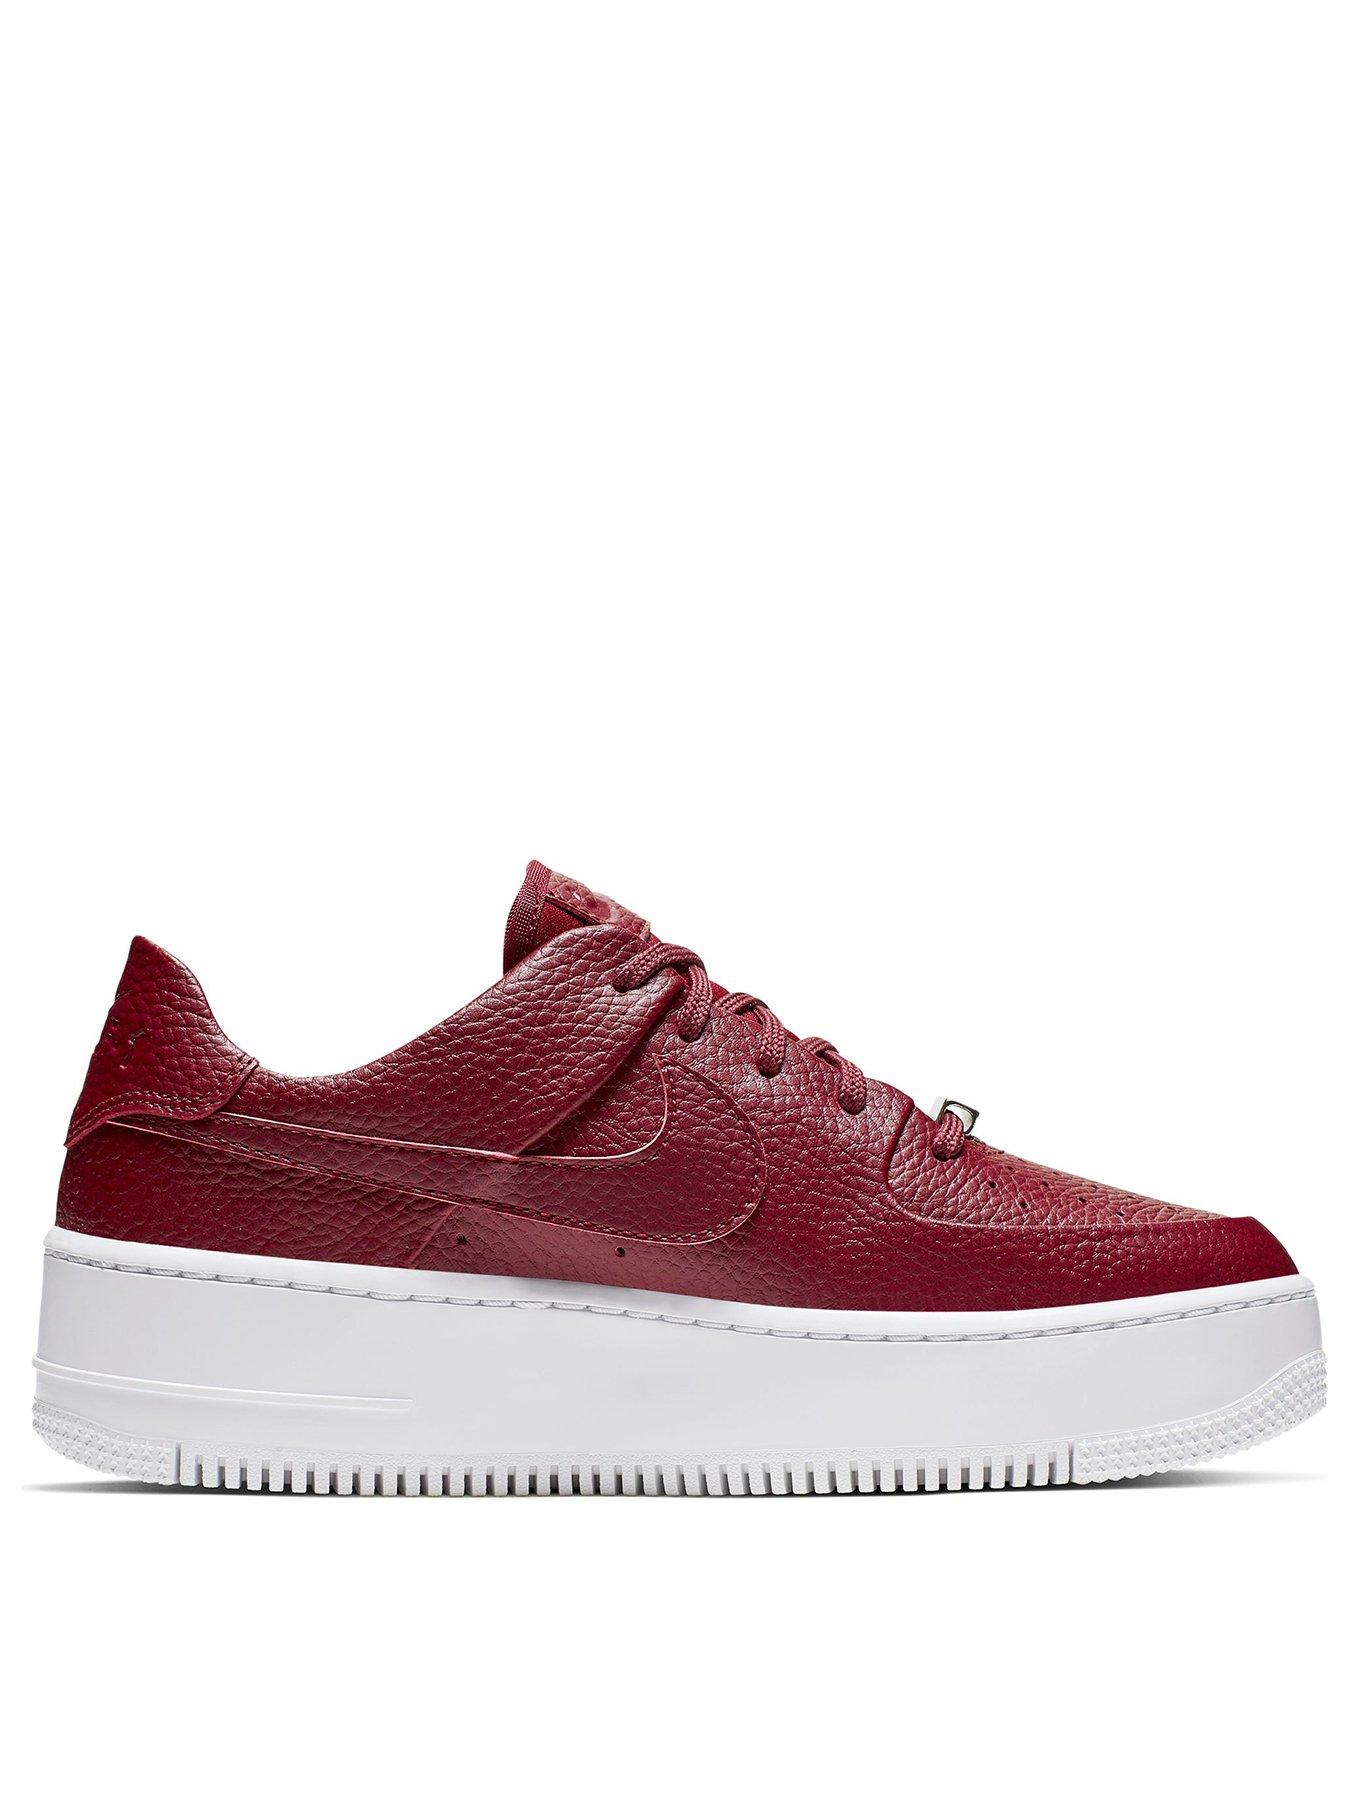 burgundy white air force ones